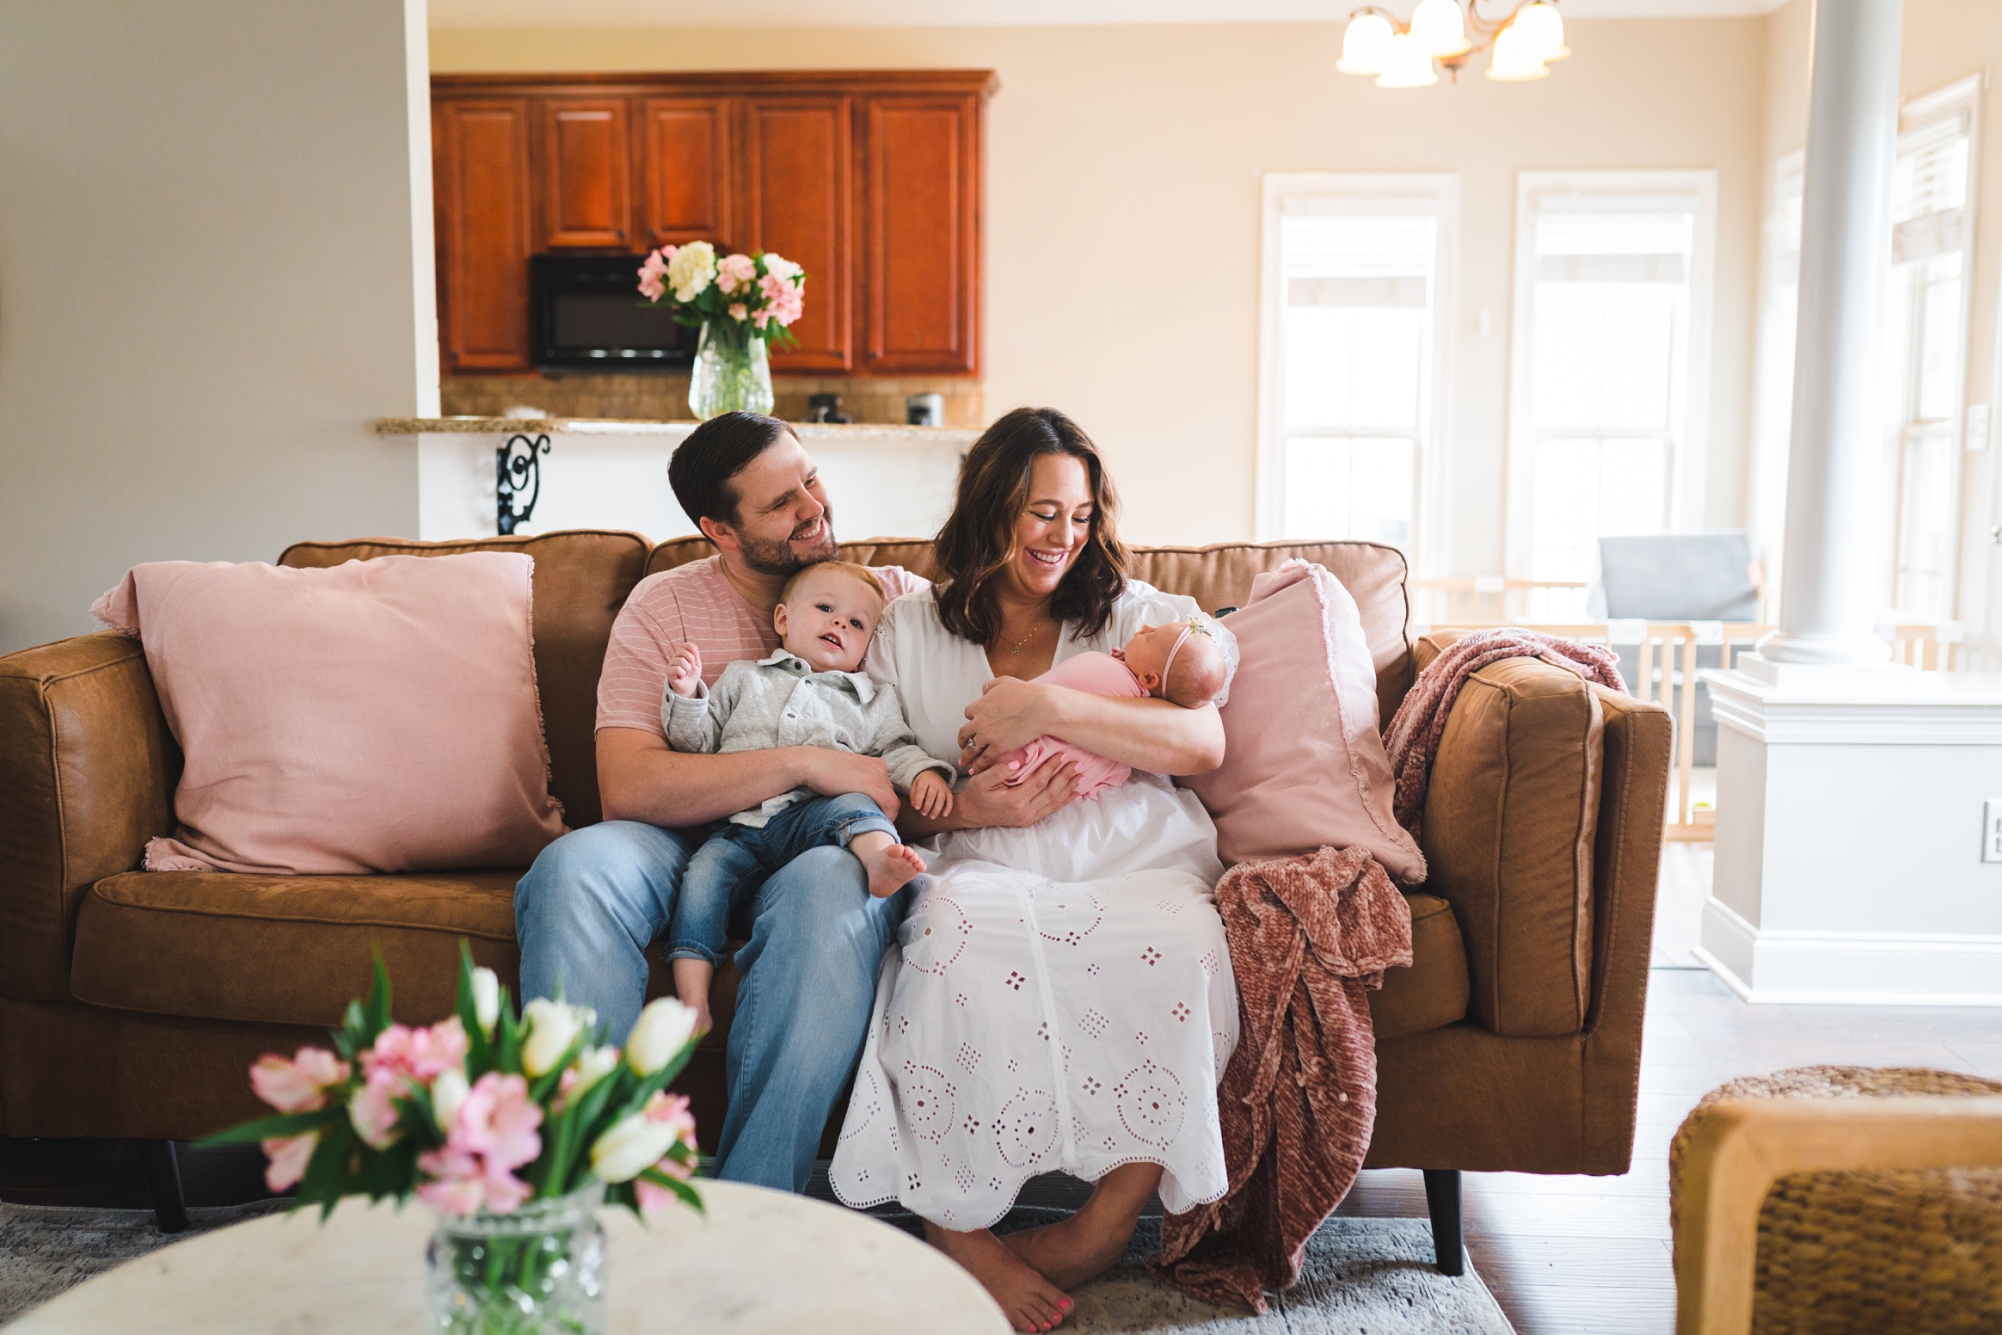 in-home newborn photo session in Virginia | Melissa Sheridan Photography